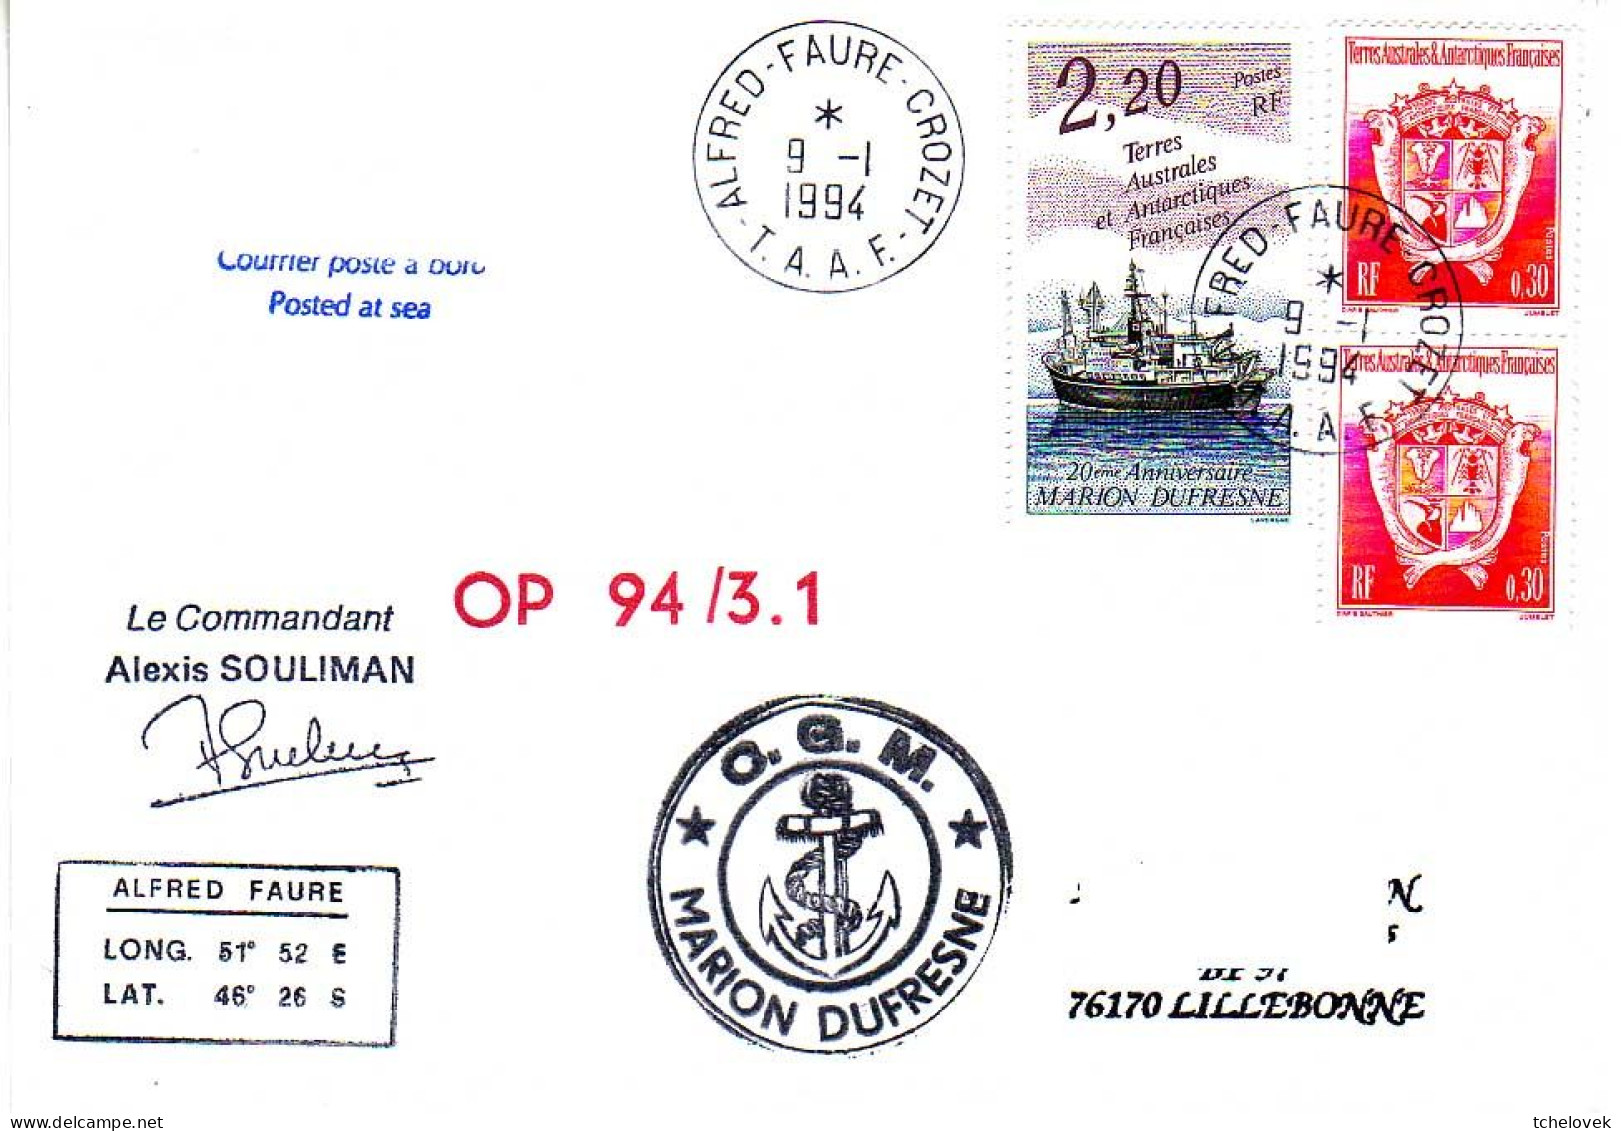 (Timbres). FSAT TAAF Marion Dufresne. 09.01.94 Crozet OP 94/3.1 - Lettres & Documents